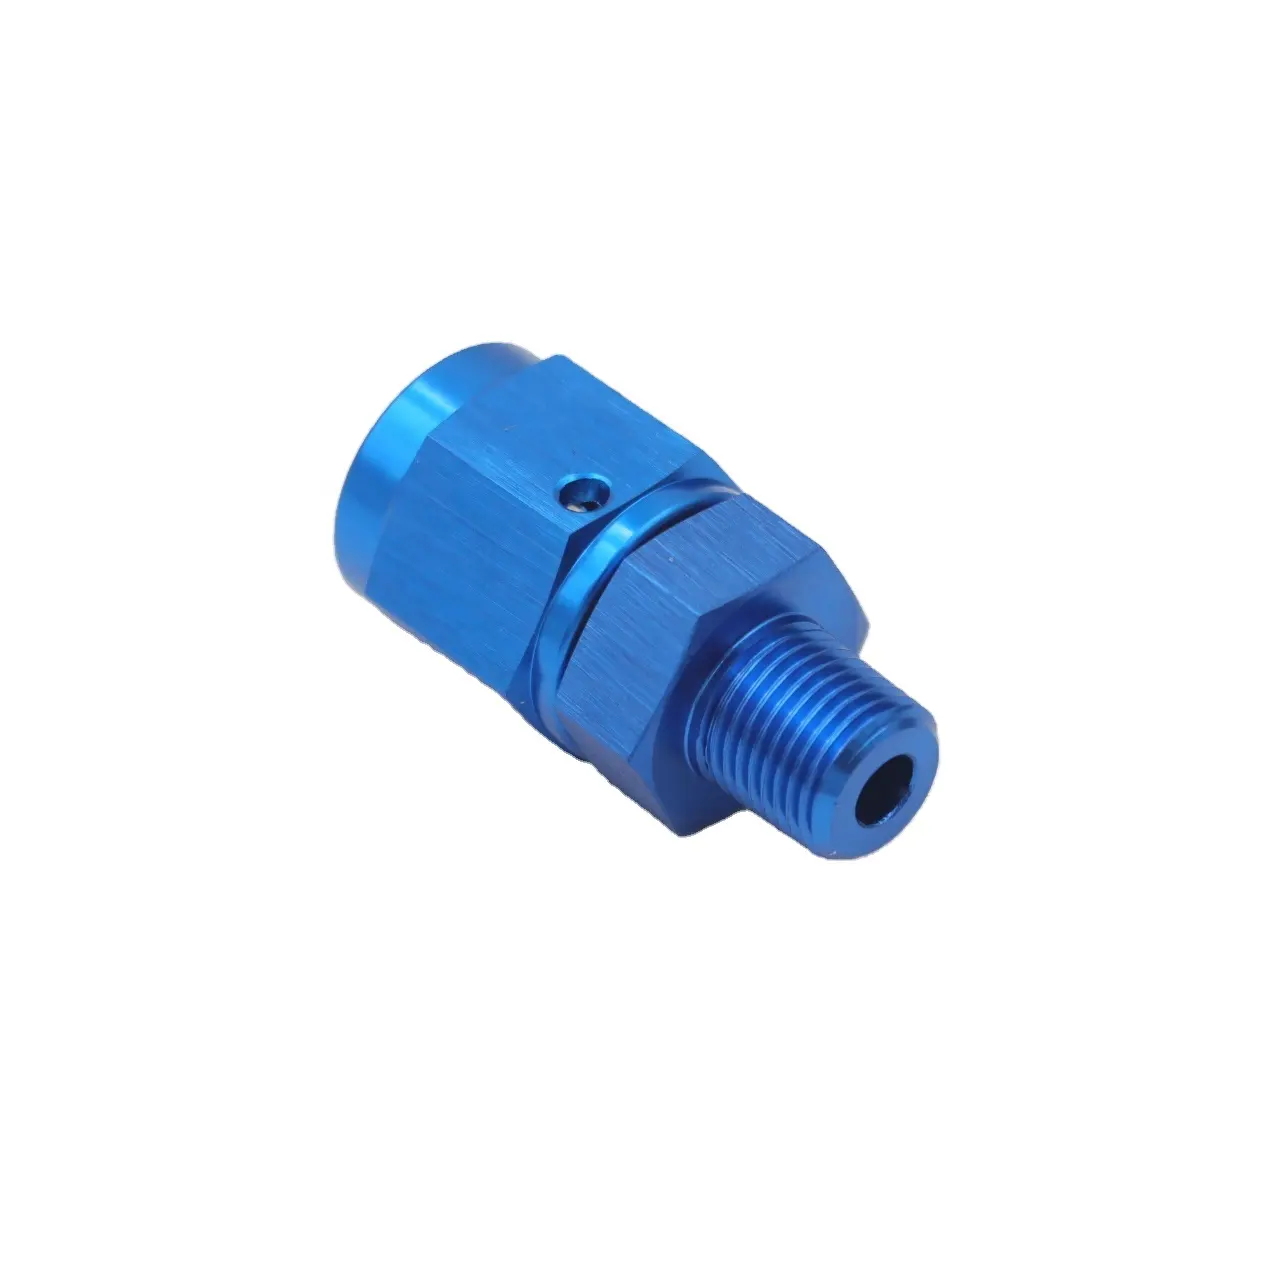 AoMei ADAPTER FITTING AN FEMALE SWIVEL TO 1/8" NPT MALE STRAIGHT BLACK BLUE ANODIZED